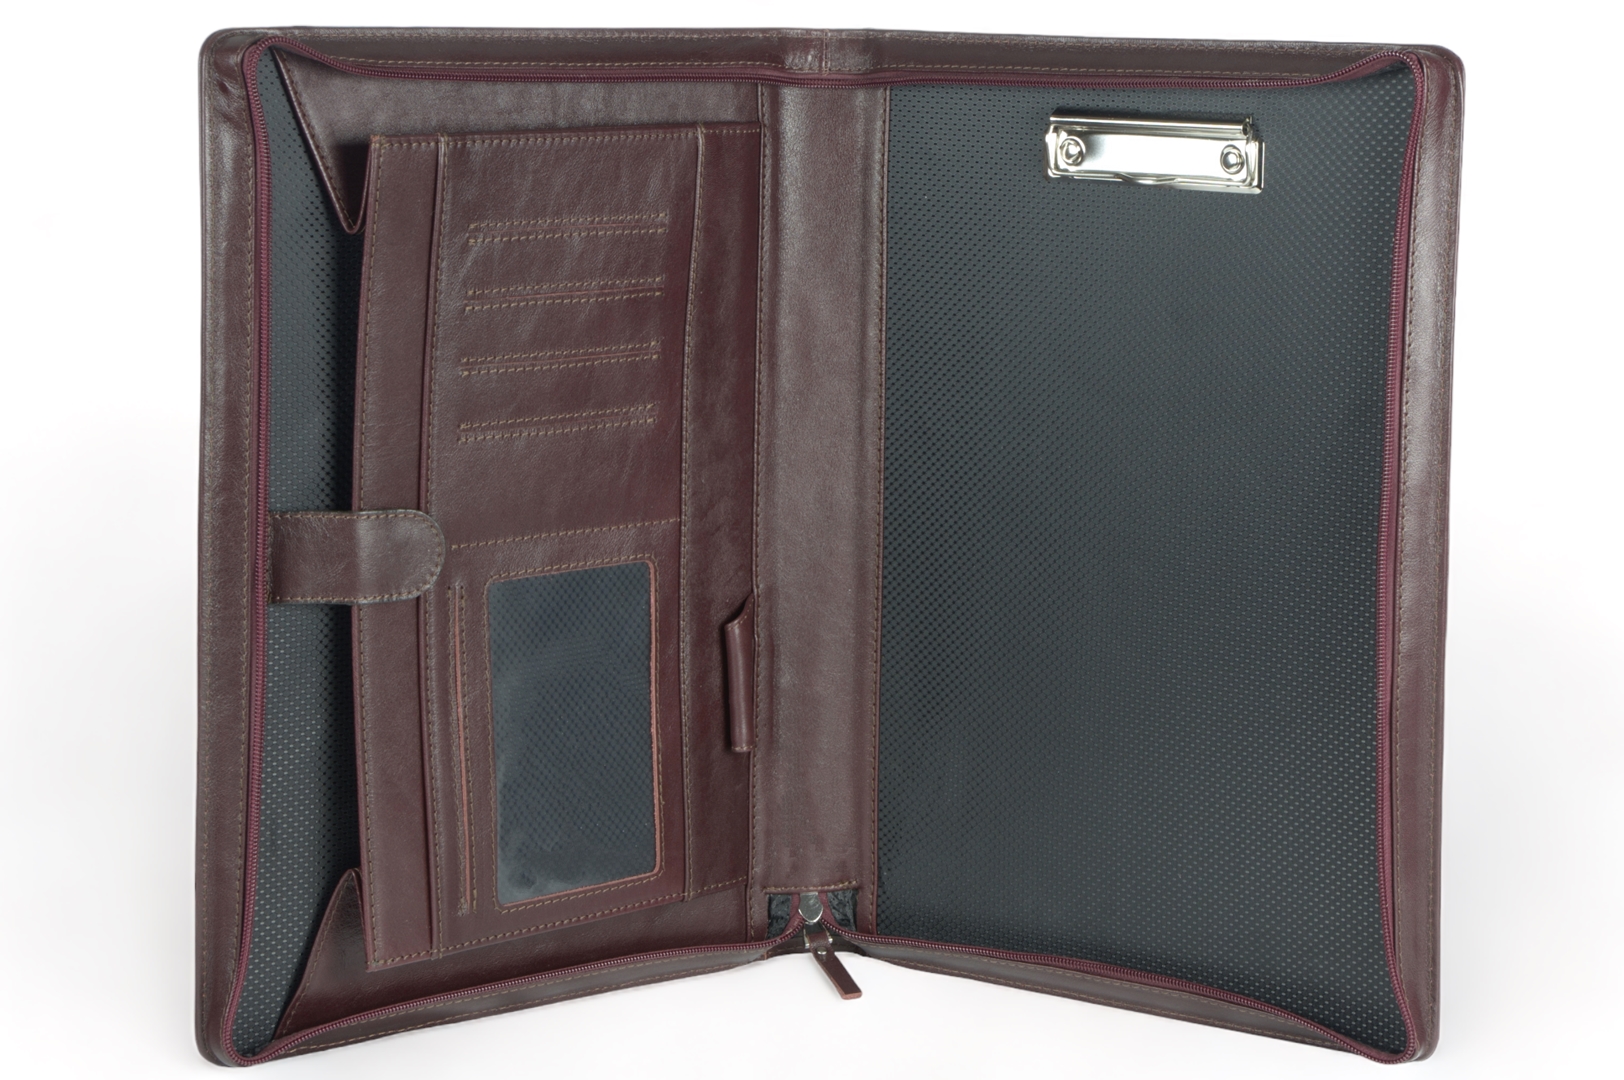 A4 zippered conference folder made of genuine leather. 2R BL 0-2F